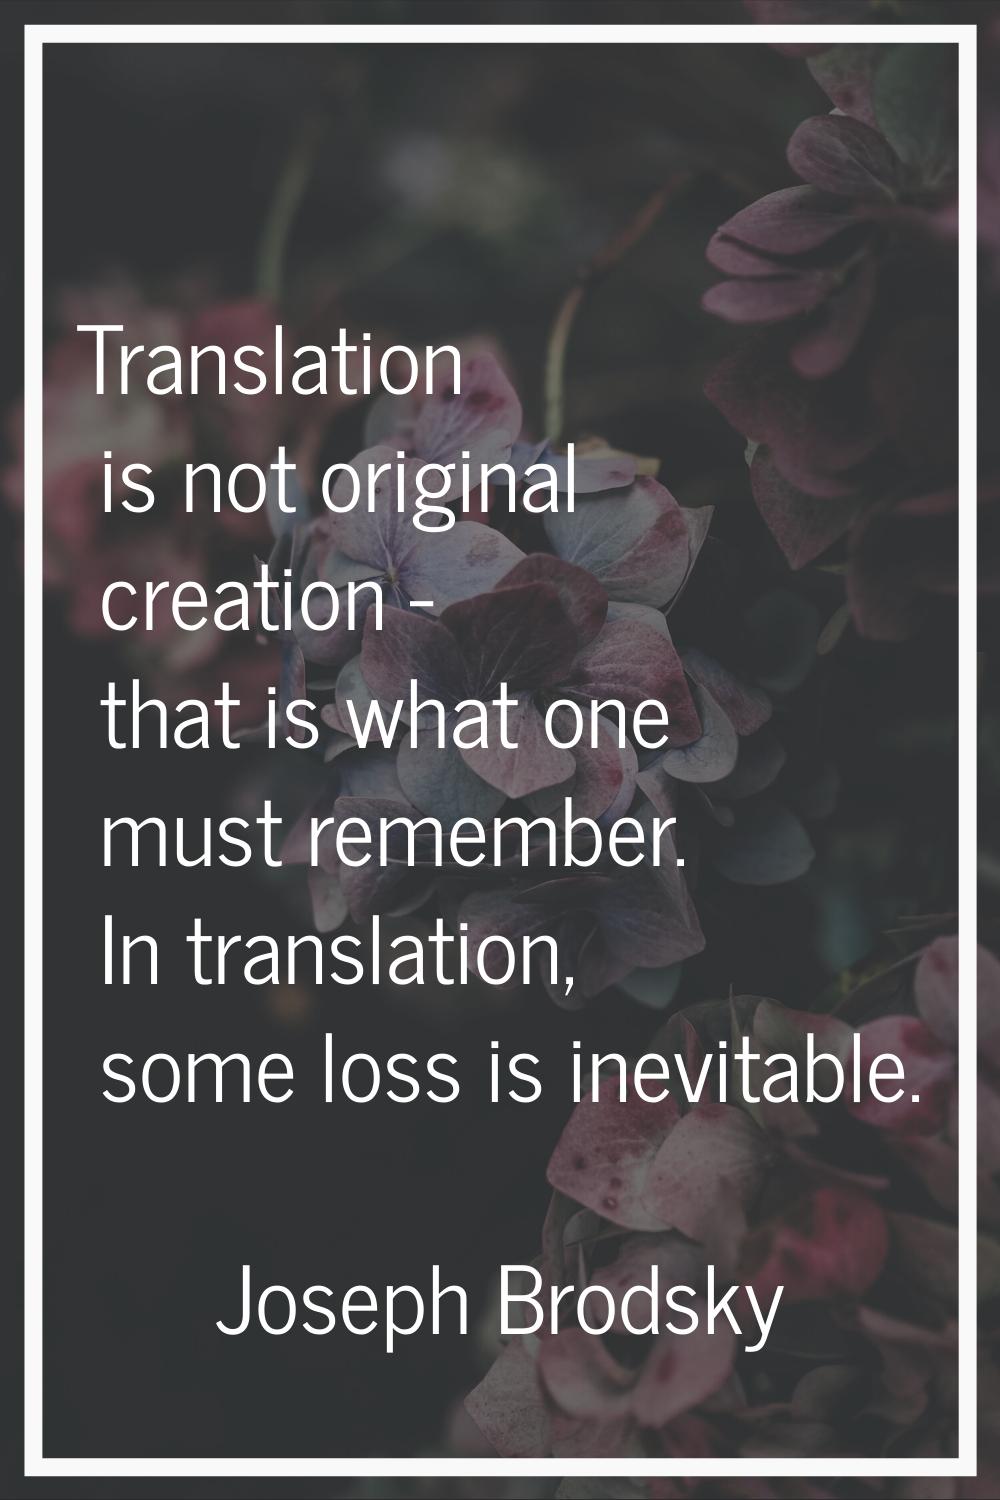 Translation is not original creation - that is what one must remember. In translation, some loss is